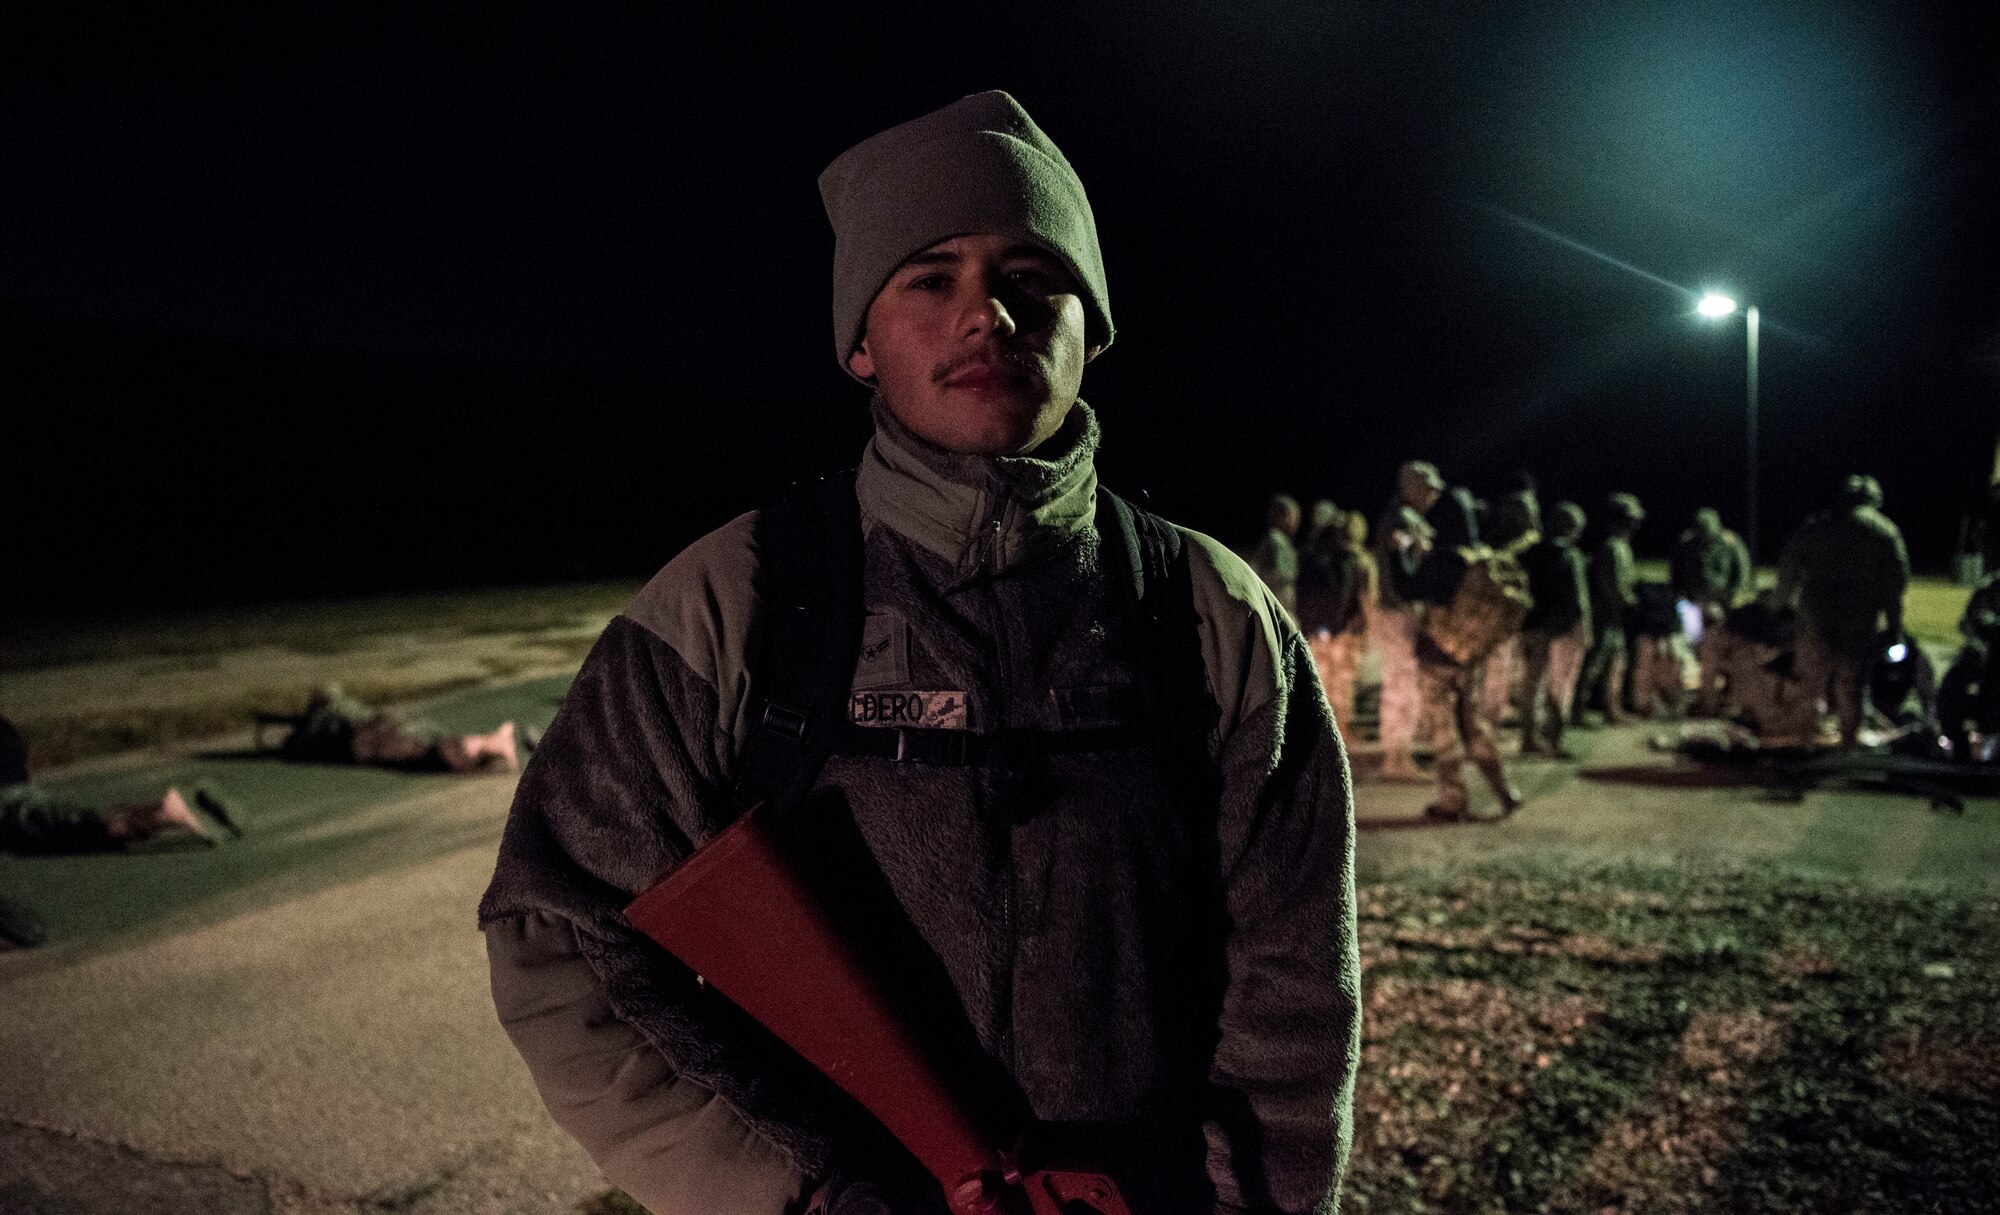 Airman 1st Class Jose Caldero, a 47th Operational Medical Readiness Squadron aerospace and operational physiology technician, participated in a medical readiness training at Laughlin Air Force Base, Texas, Oct. 25, 2019. Caldero is one of approximately 65 medics who spent the early hours of Friday morning improving his readiness skills by playing the role of security during the training. (U.S. Air Force photo by Senior Airman Marco A. Gomez)